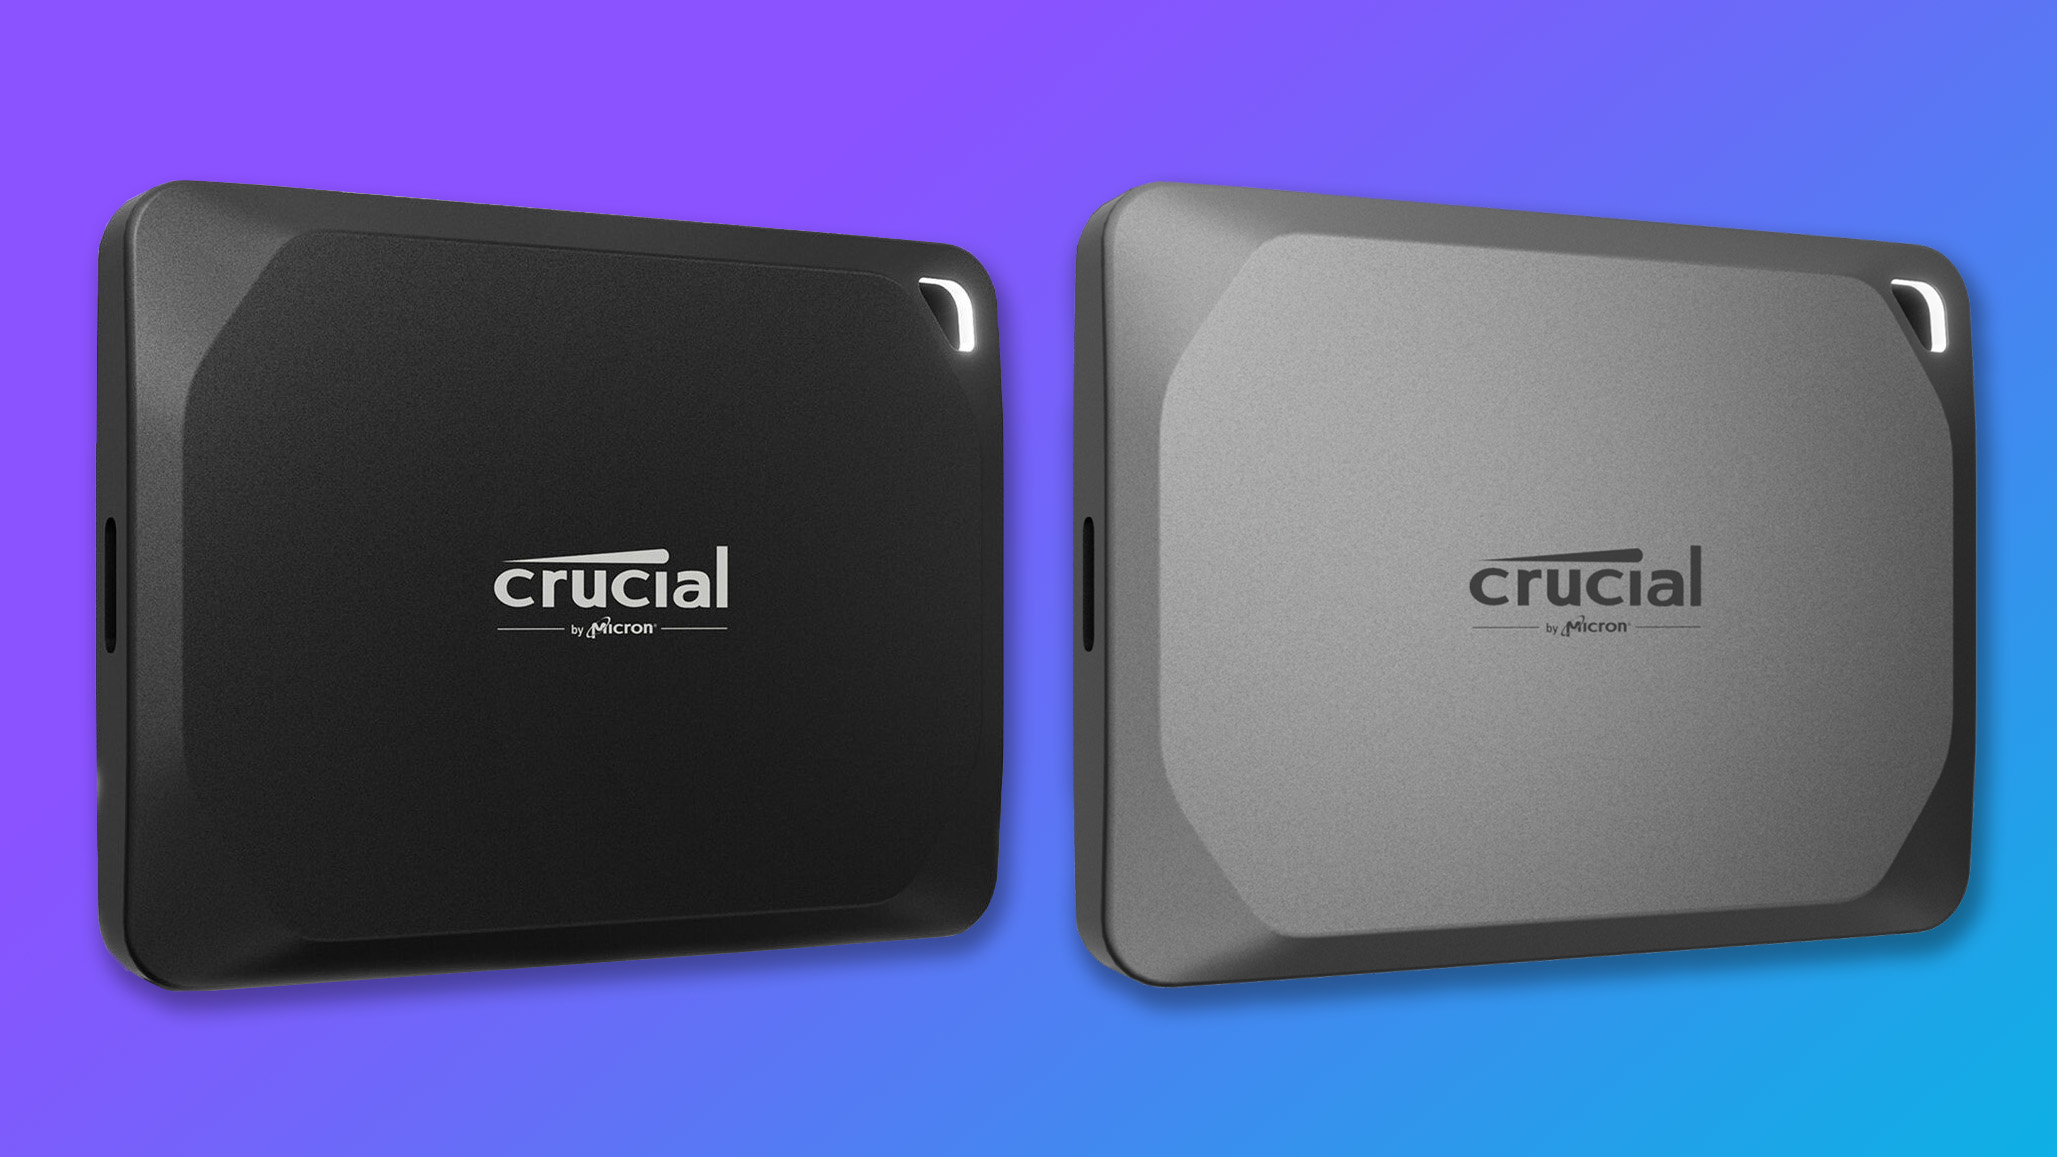 Crucial X9 Pro and X10 Pro SSDs Tested For Photography